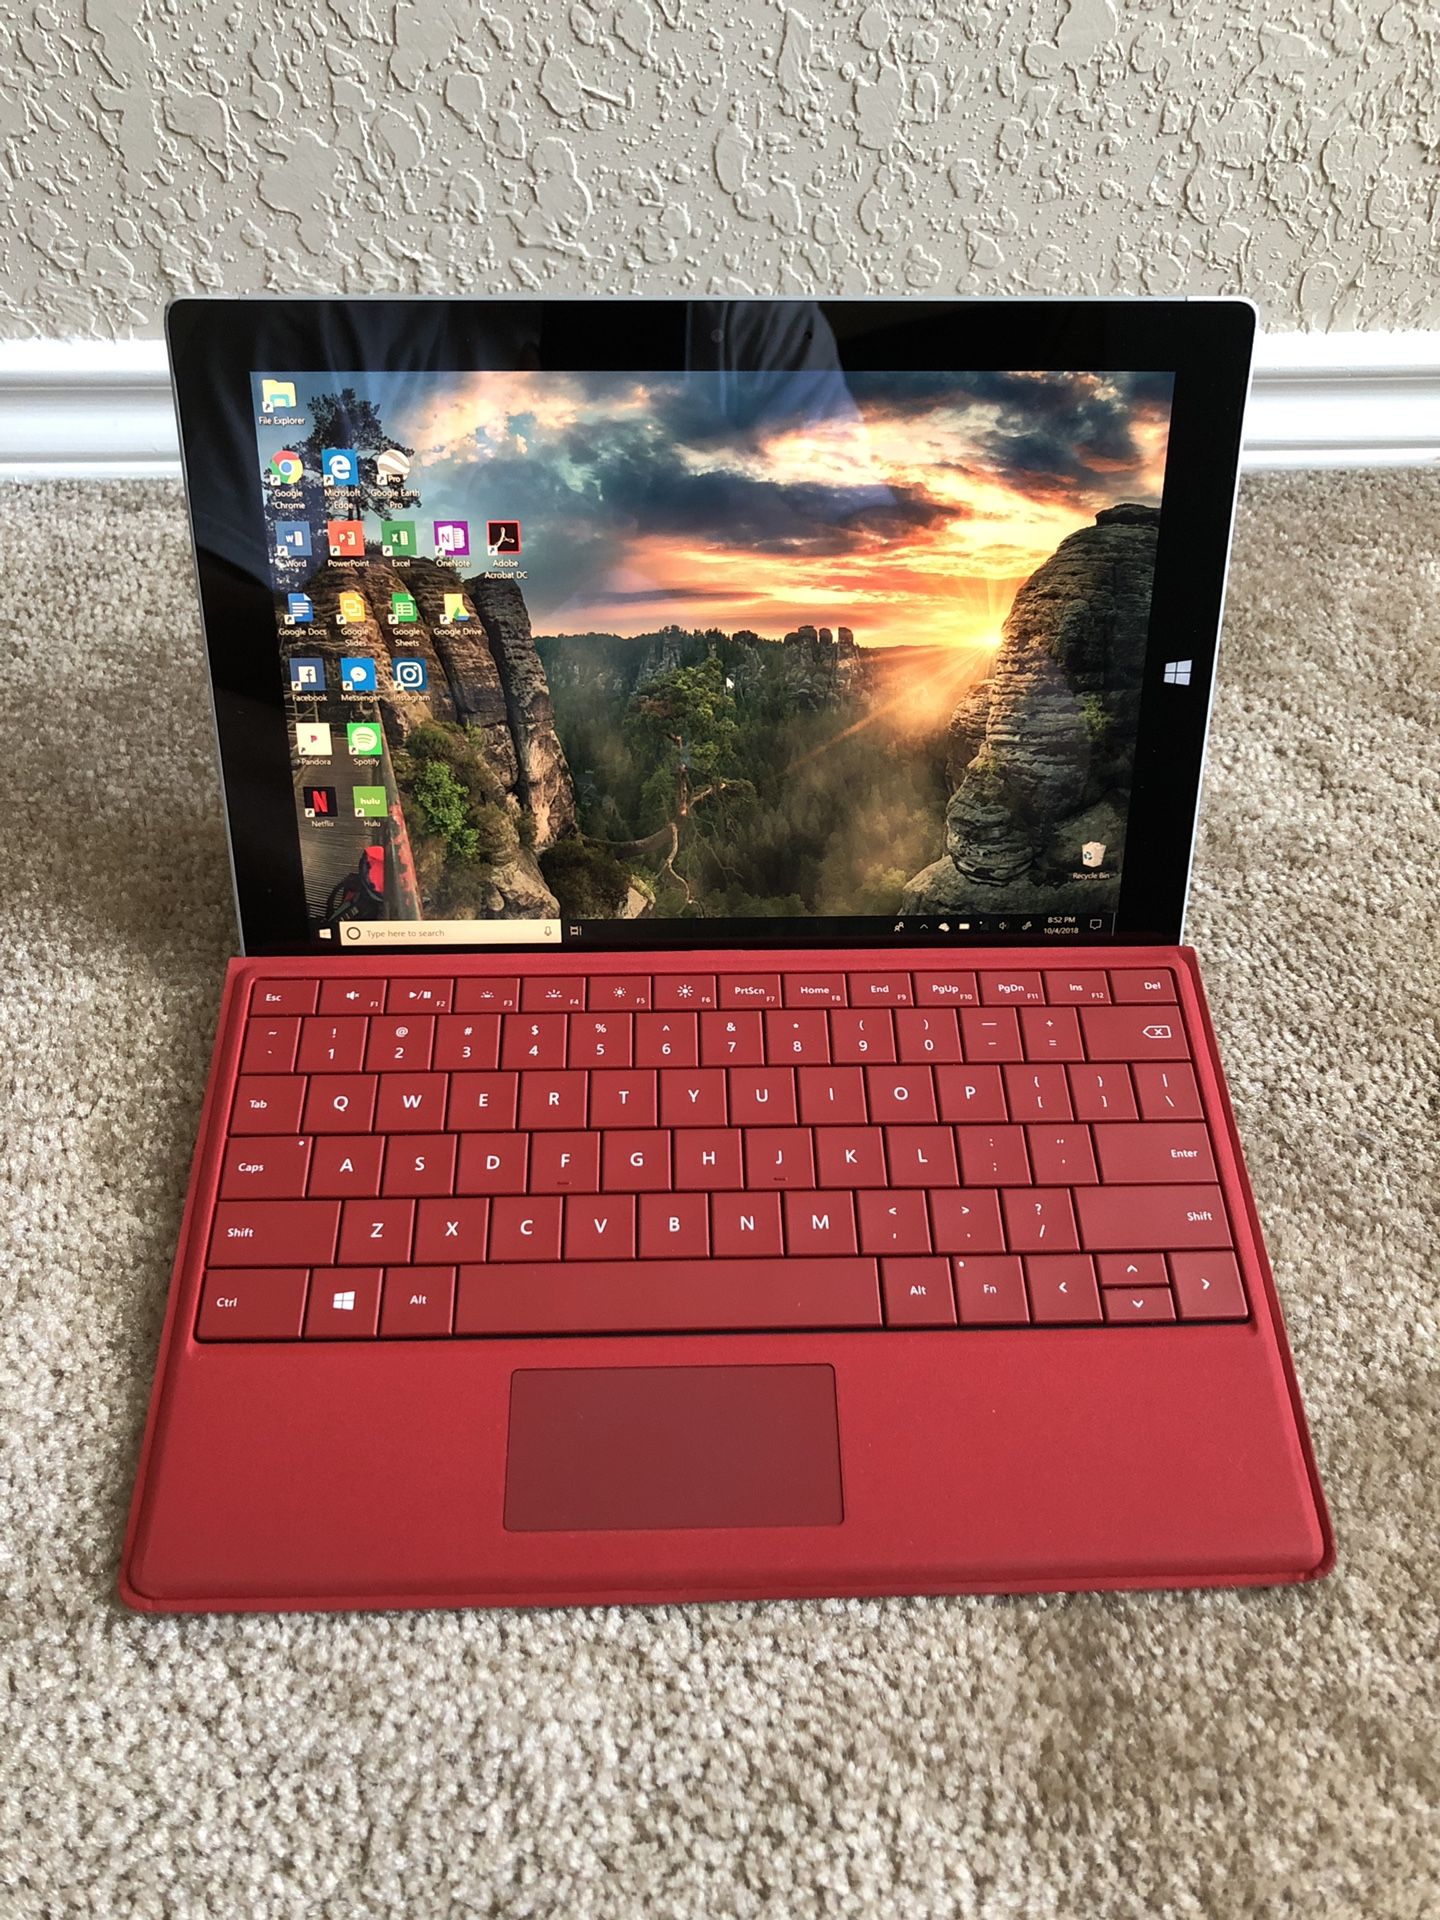 Microsoft Surface 64gb touchscreen tablet with removable keyboard